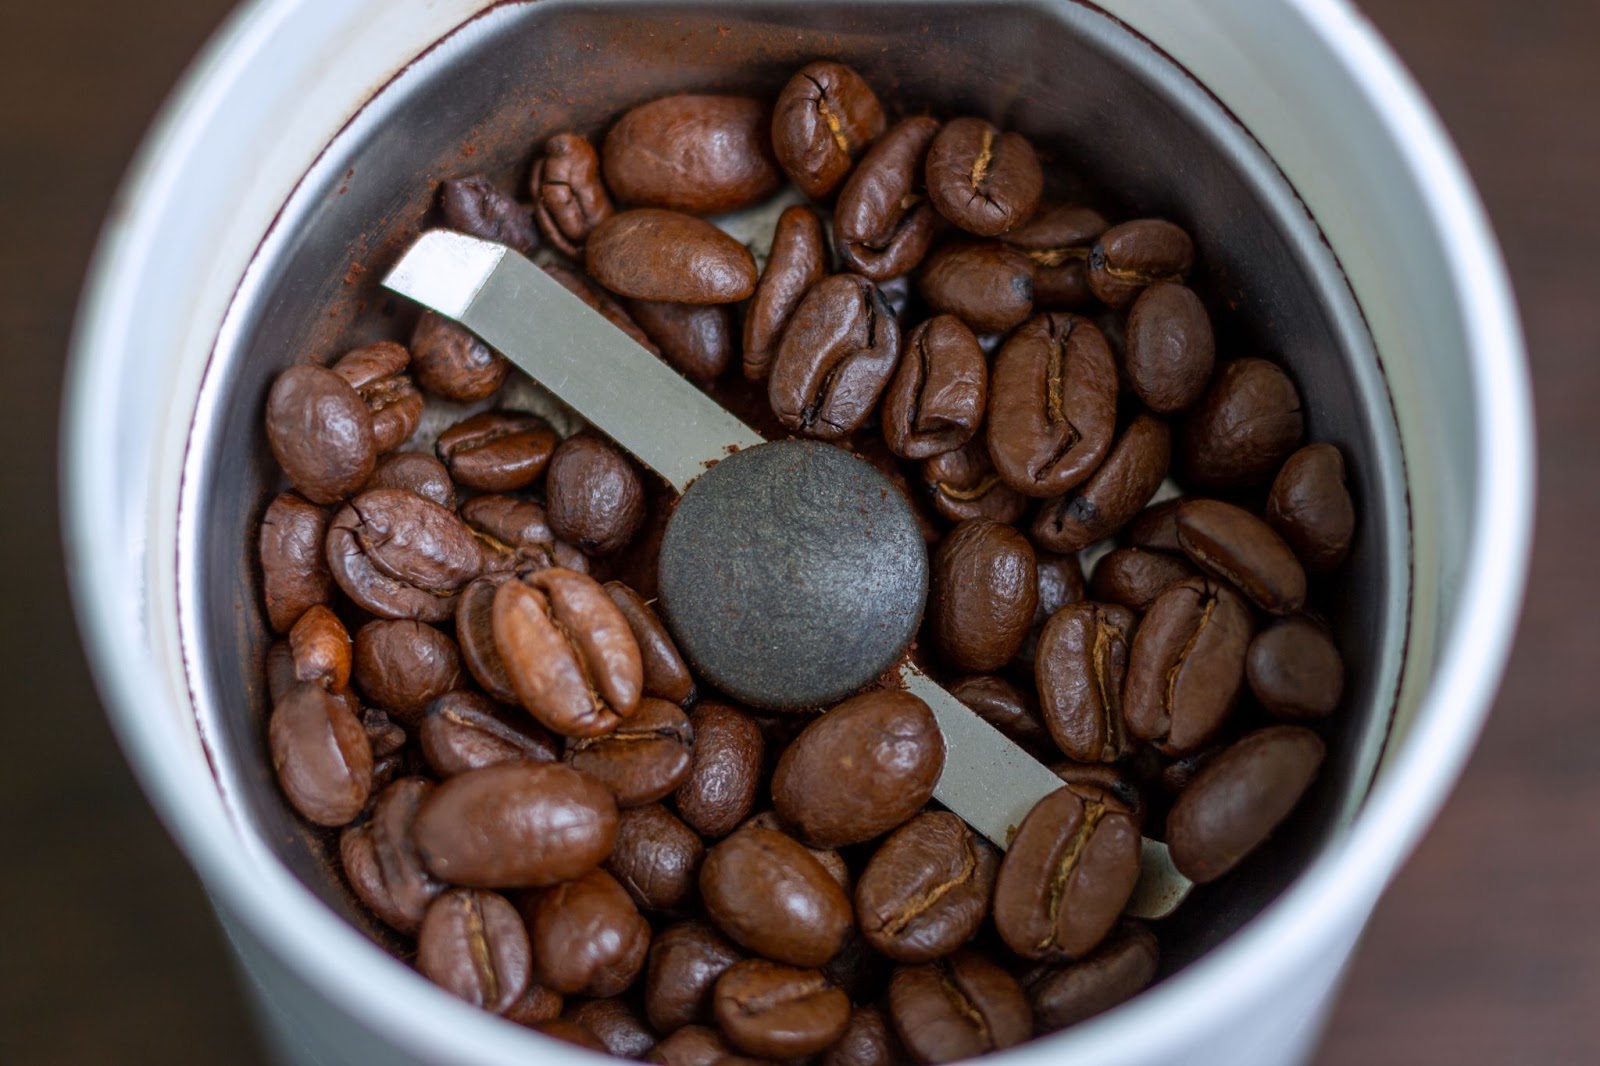 Why You Shouldn't Use a Blade Grinder for Your Coffee